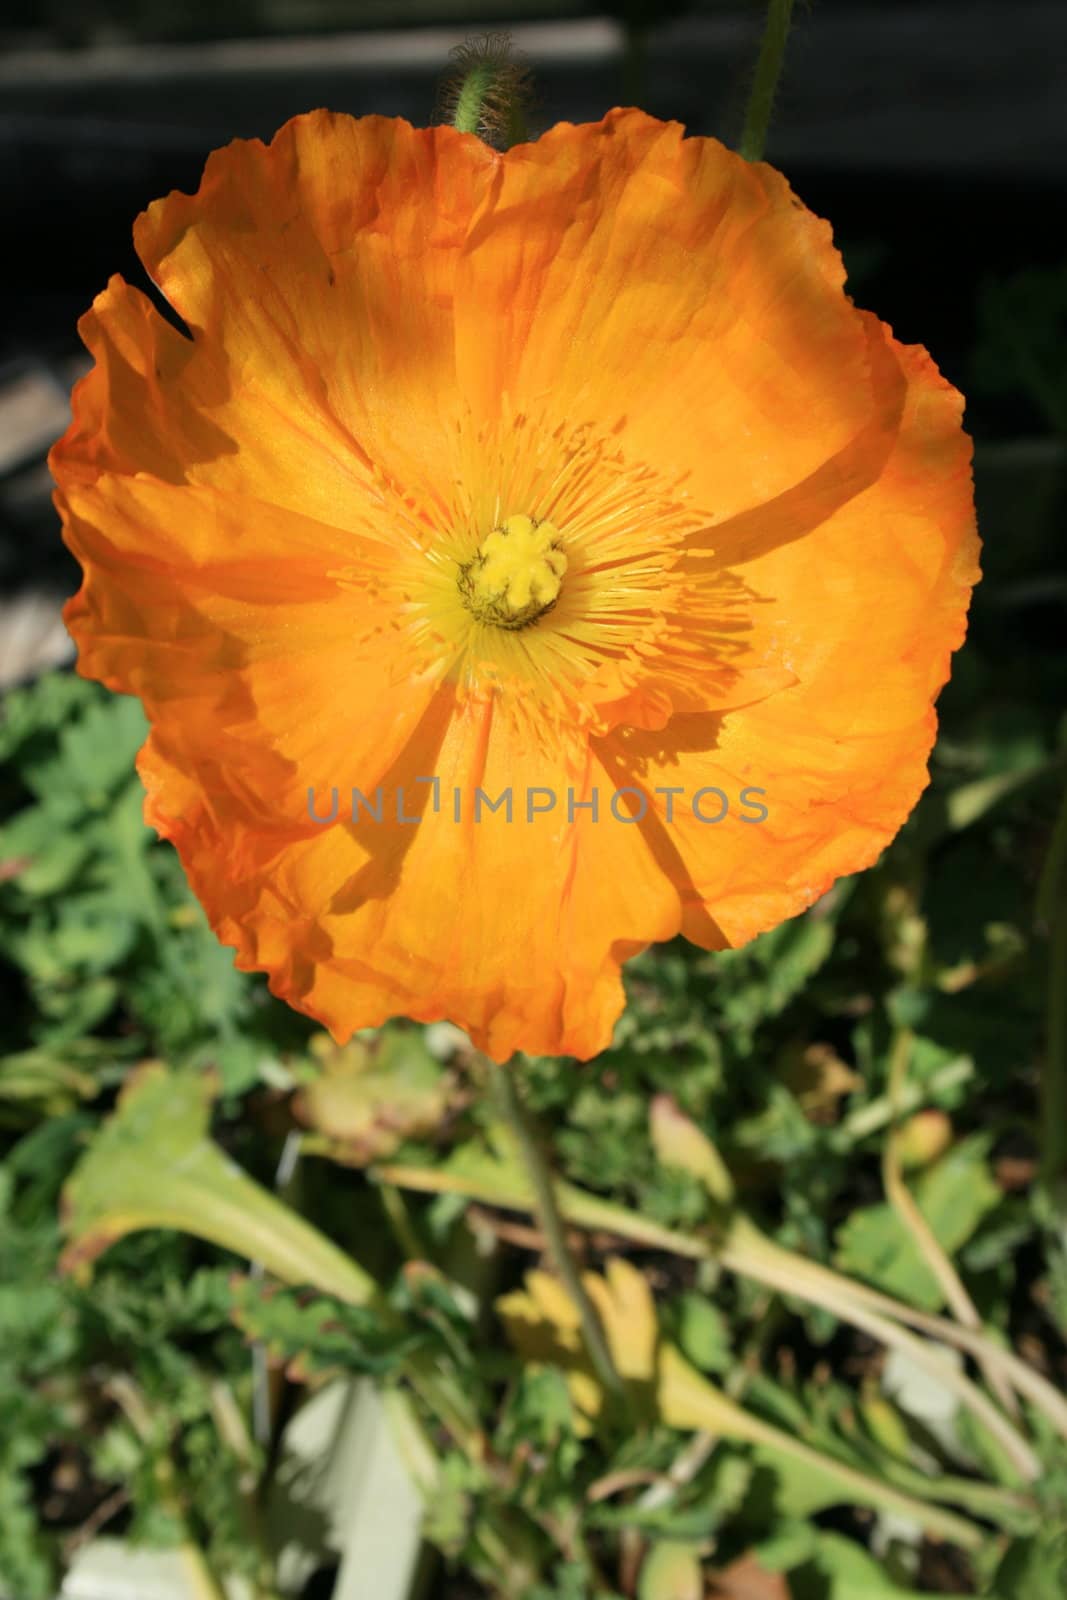 Close up of a yellow poppy flower.
